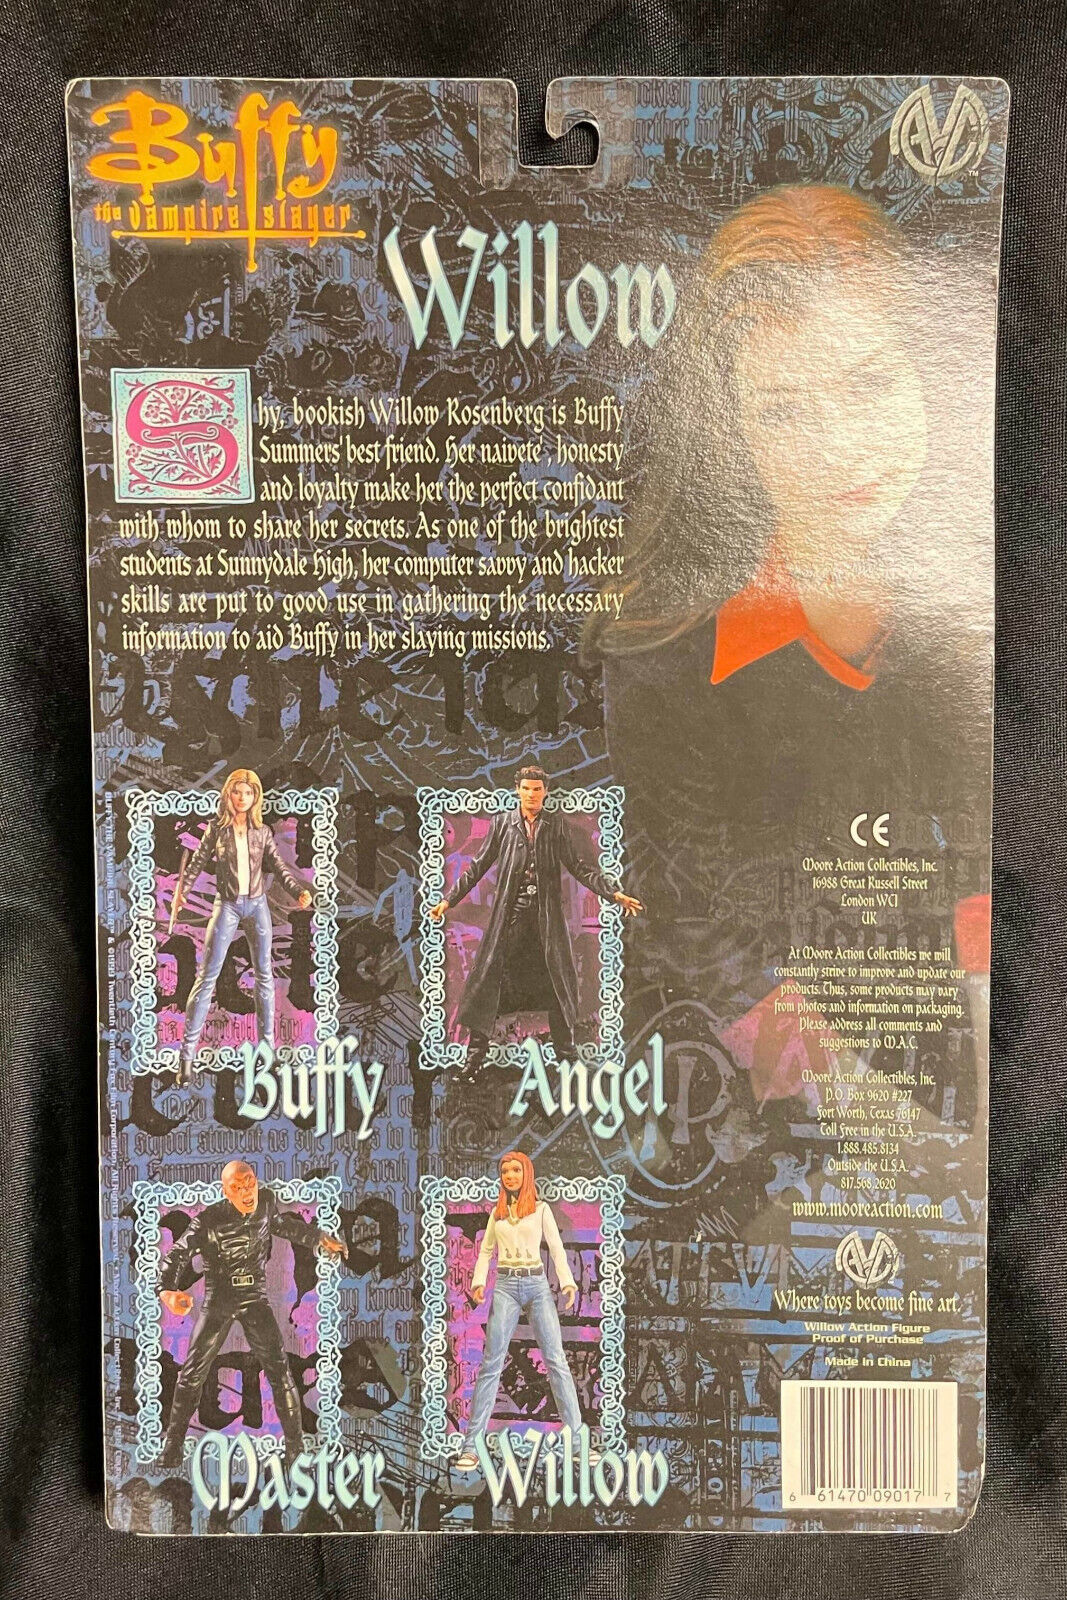 Buffy the Vampire Slayer WILLOW Exclusive Figure 1999 Moore Action Collectibles